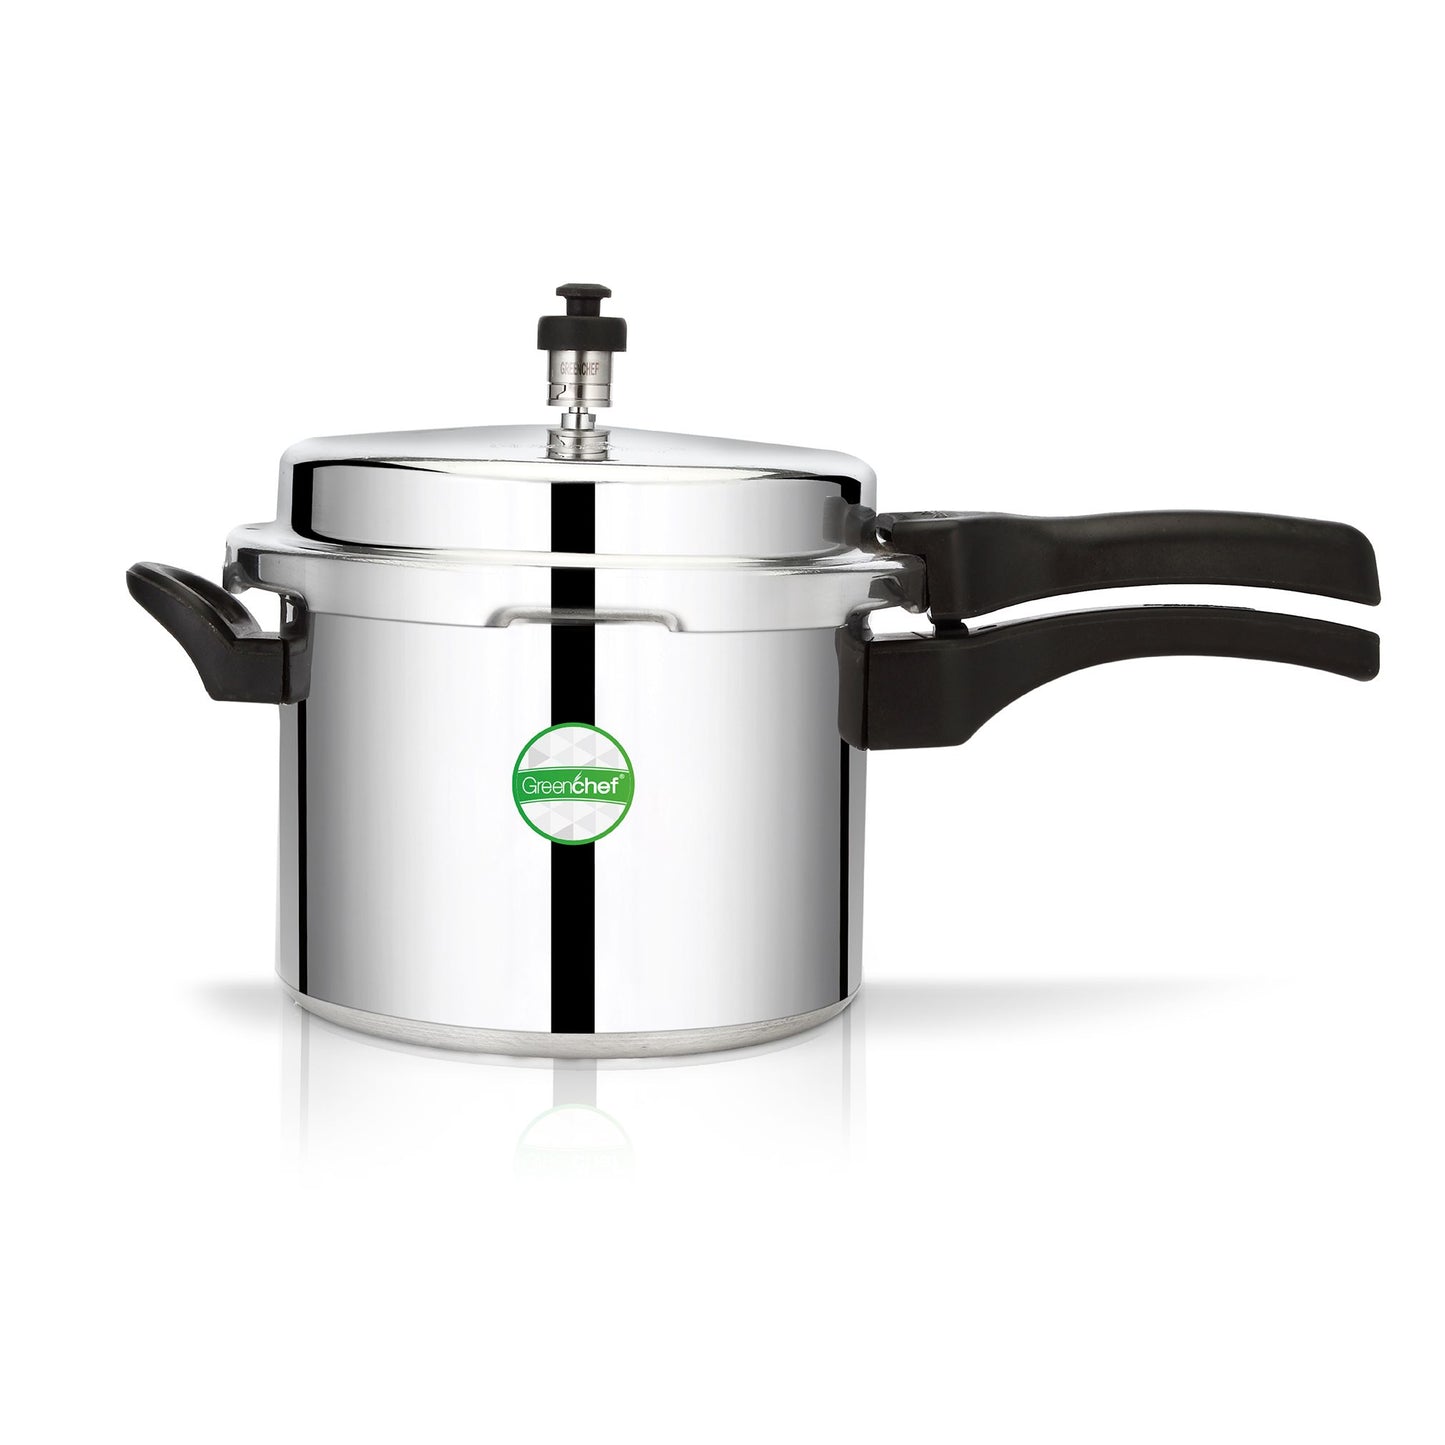 Greenchef Namo Aluminium Non-Induction Base Outer Lid Pressure Cooker, 5 Litres